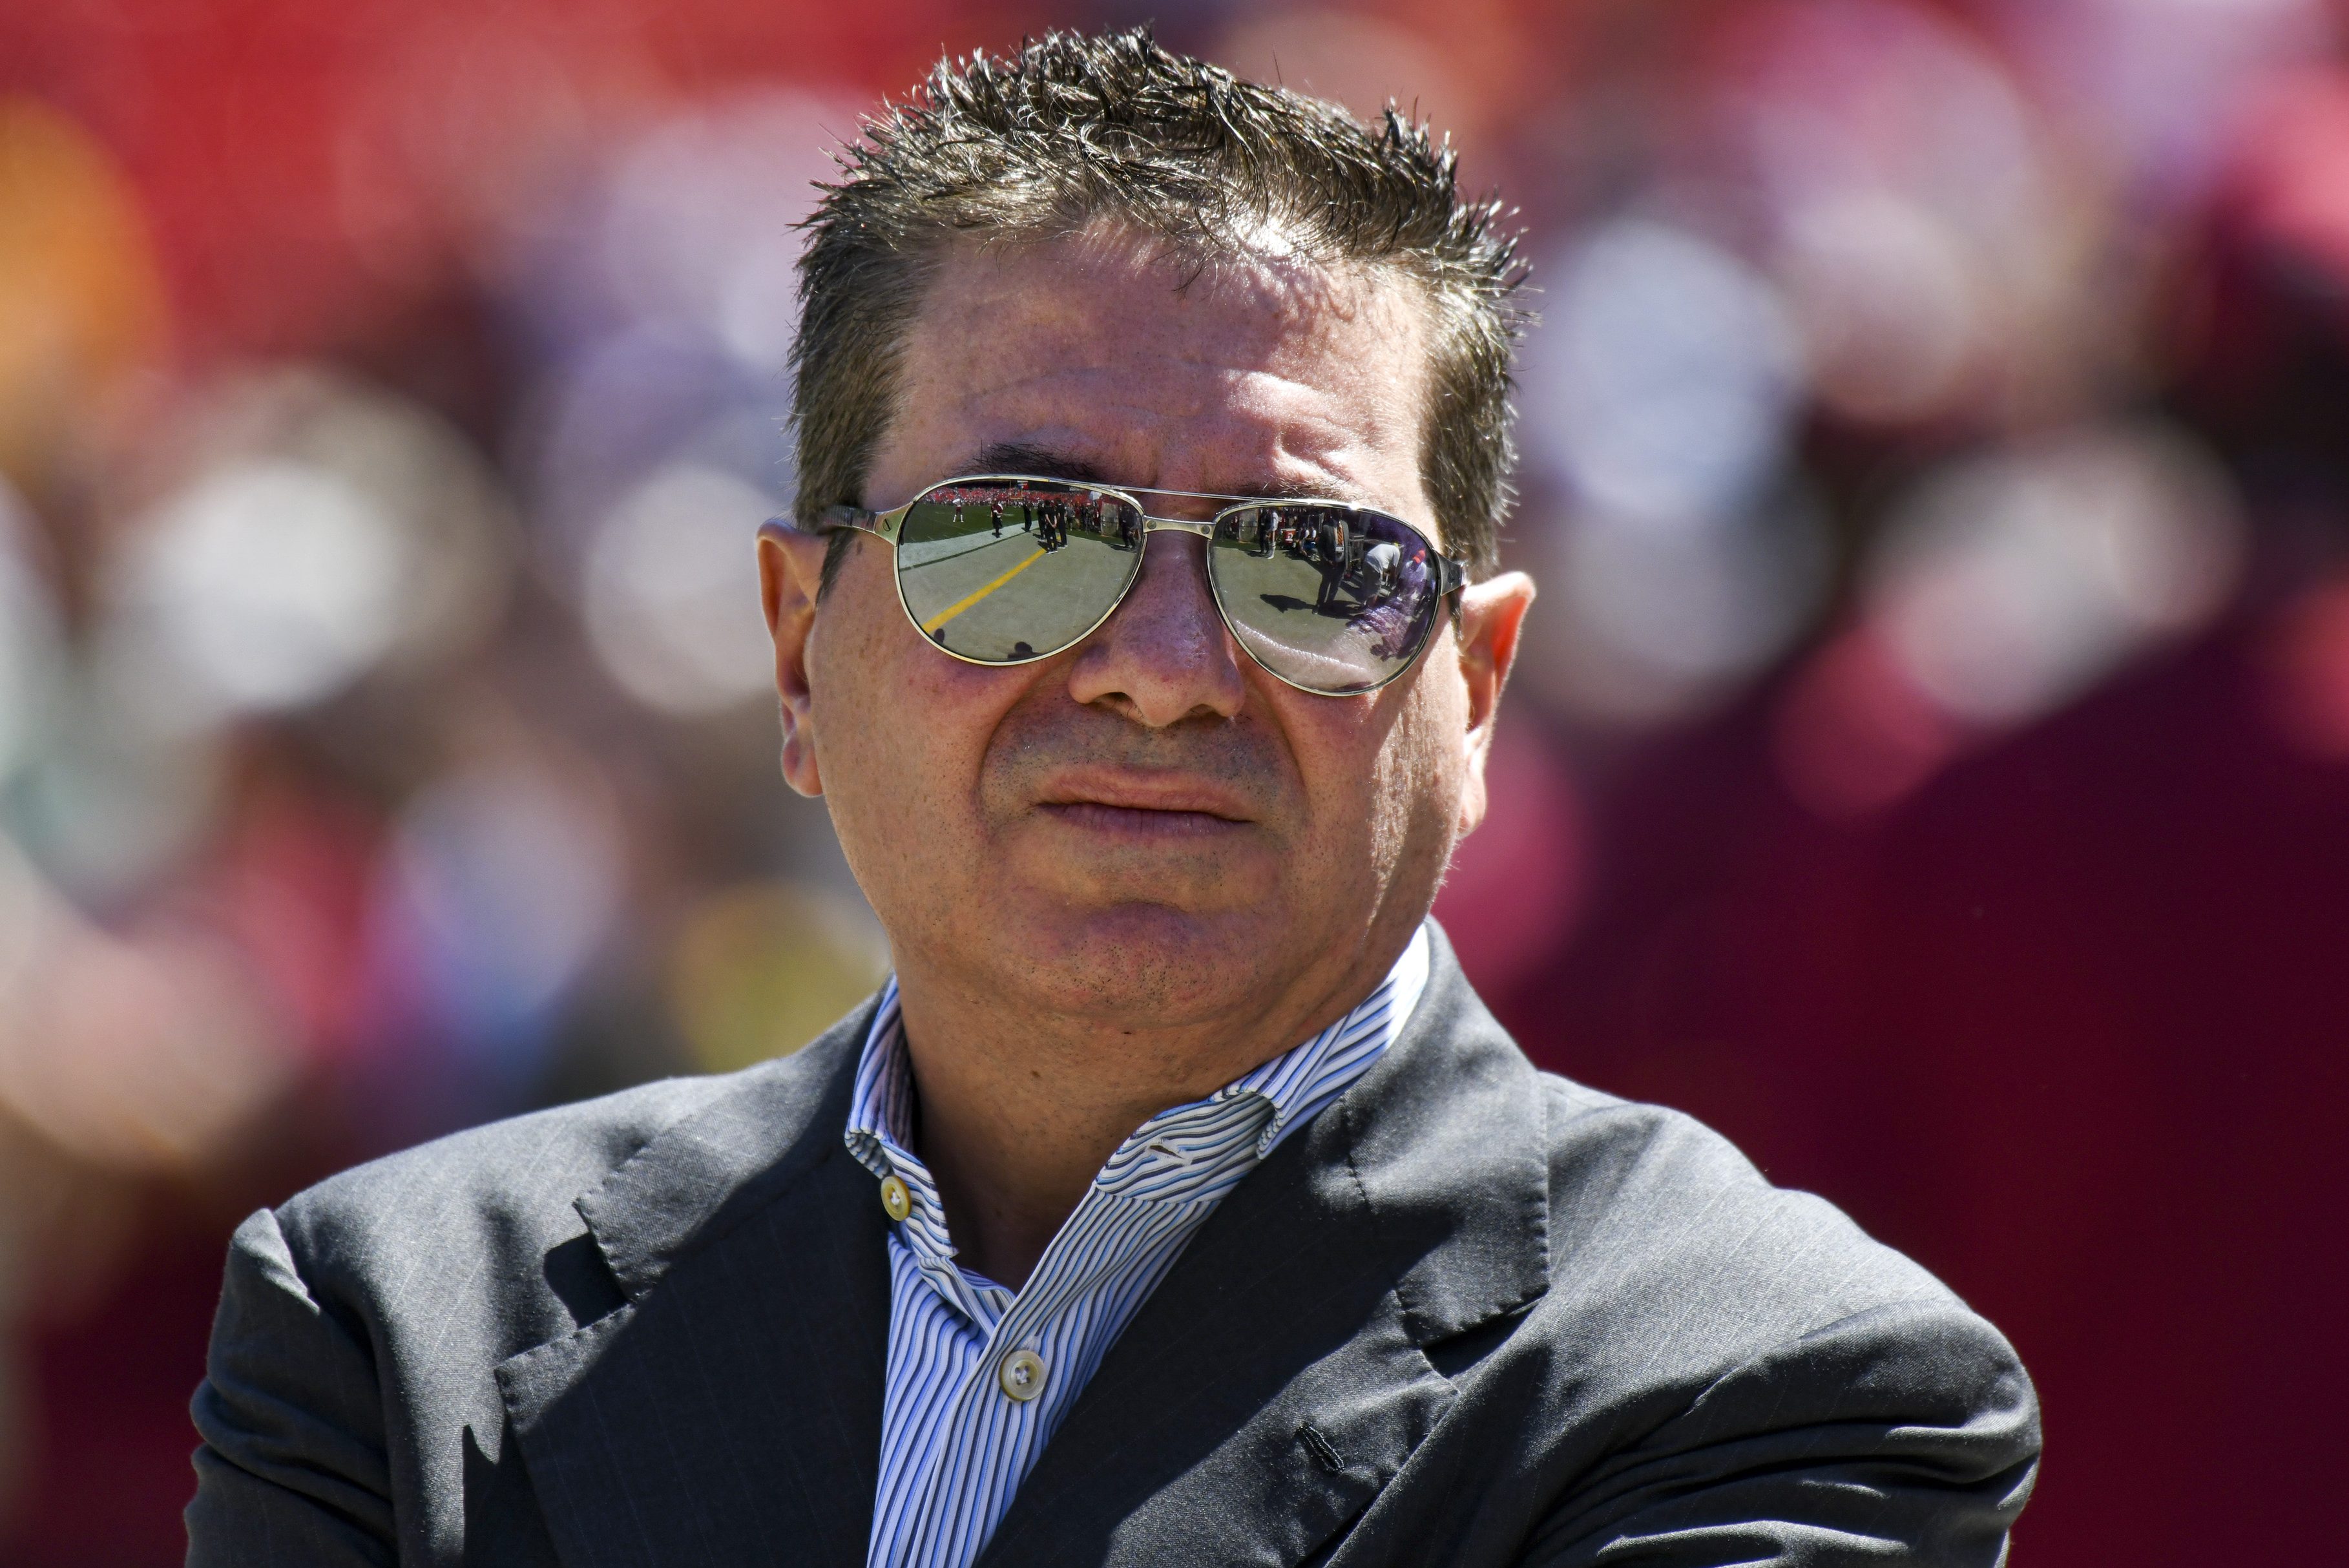 What 'Dirt' Does Daniel Snyder Have on NFL Owners and Roger Goodell? -  InsideHook